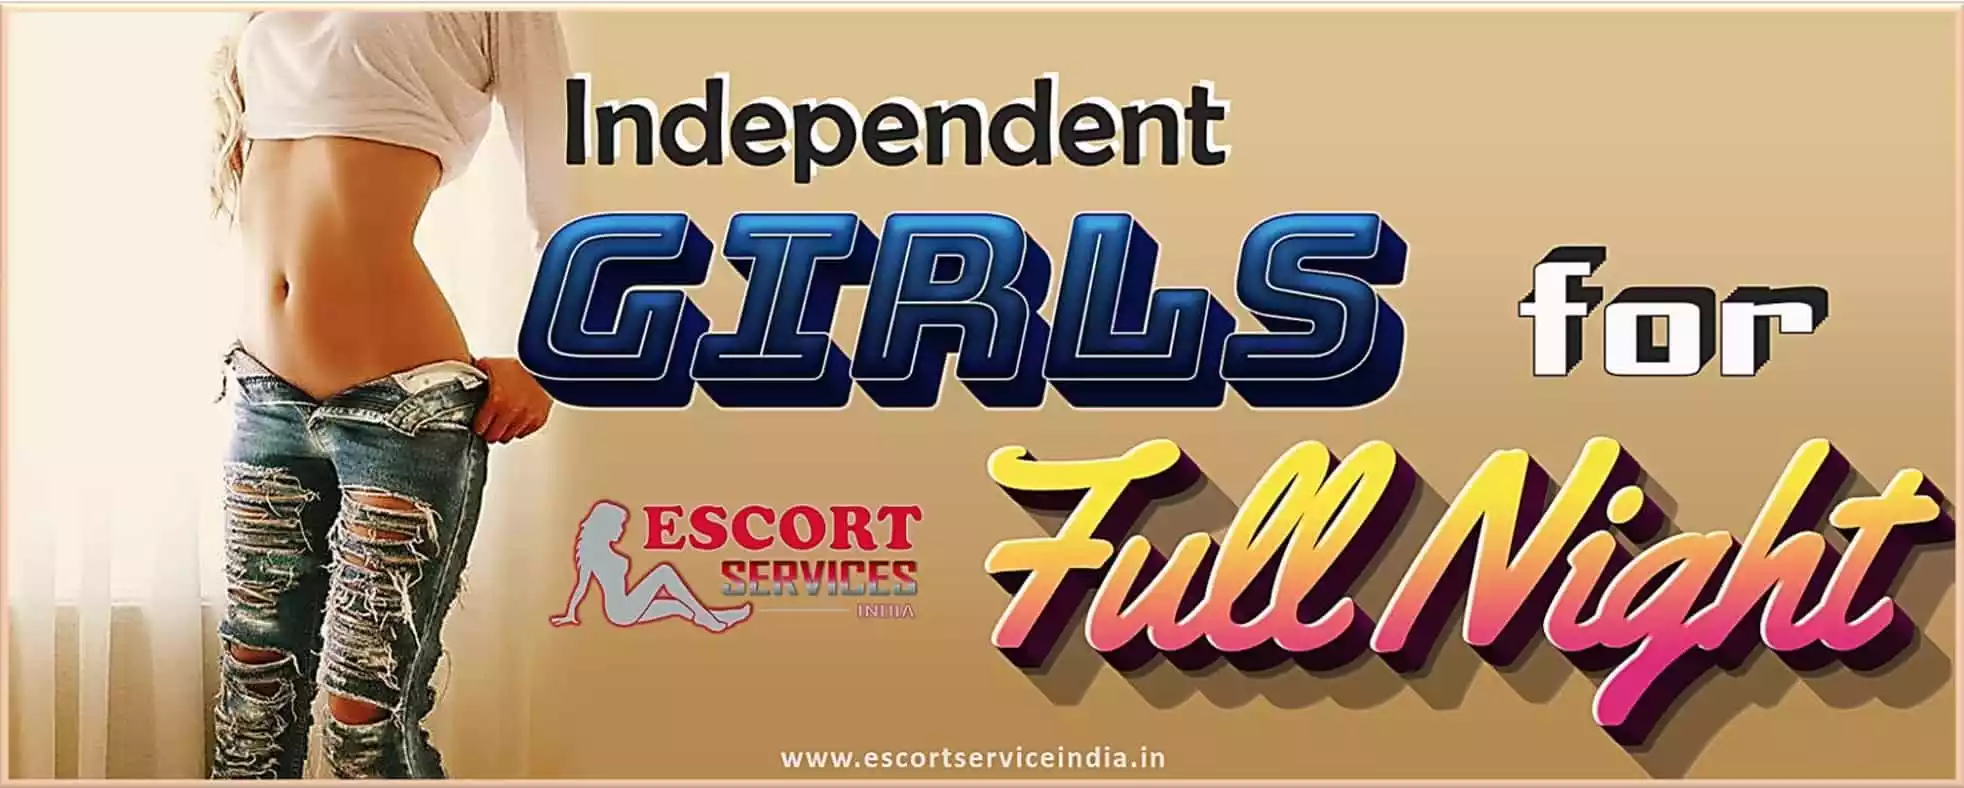 Independent Call Girl in Delhi